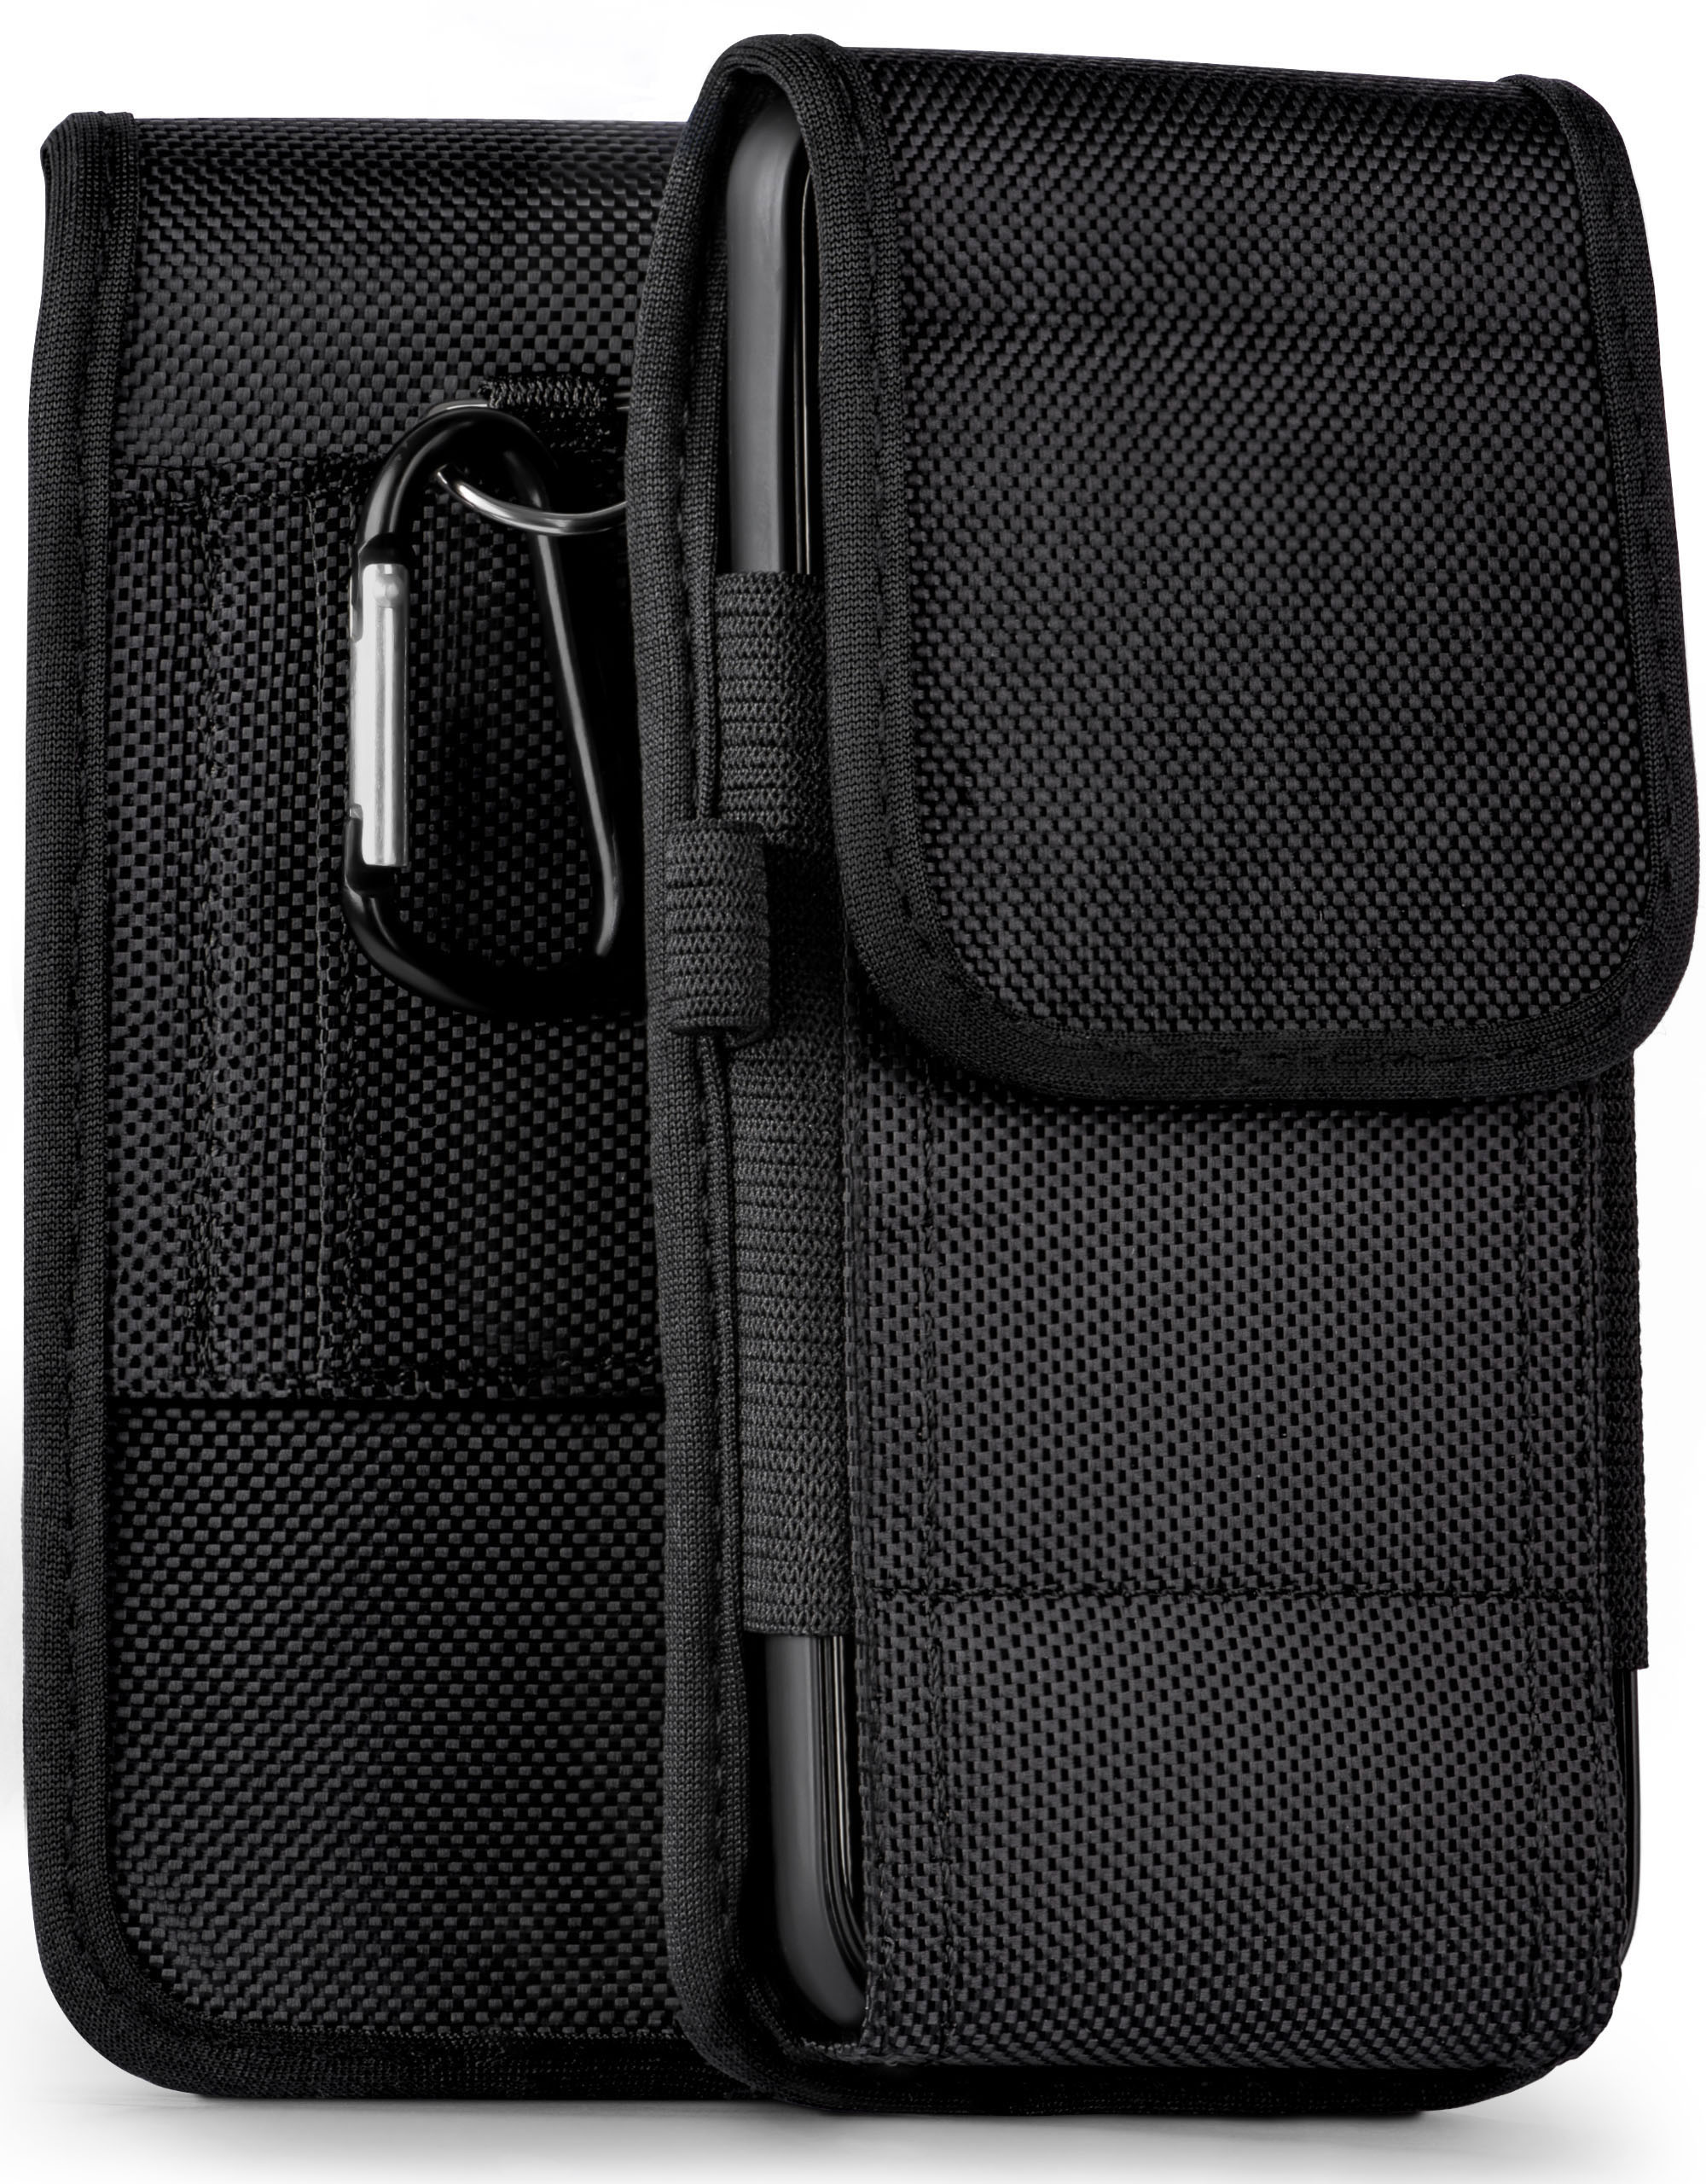 Case, Holster, S52, MOEX CAT, Agility Trail